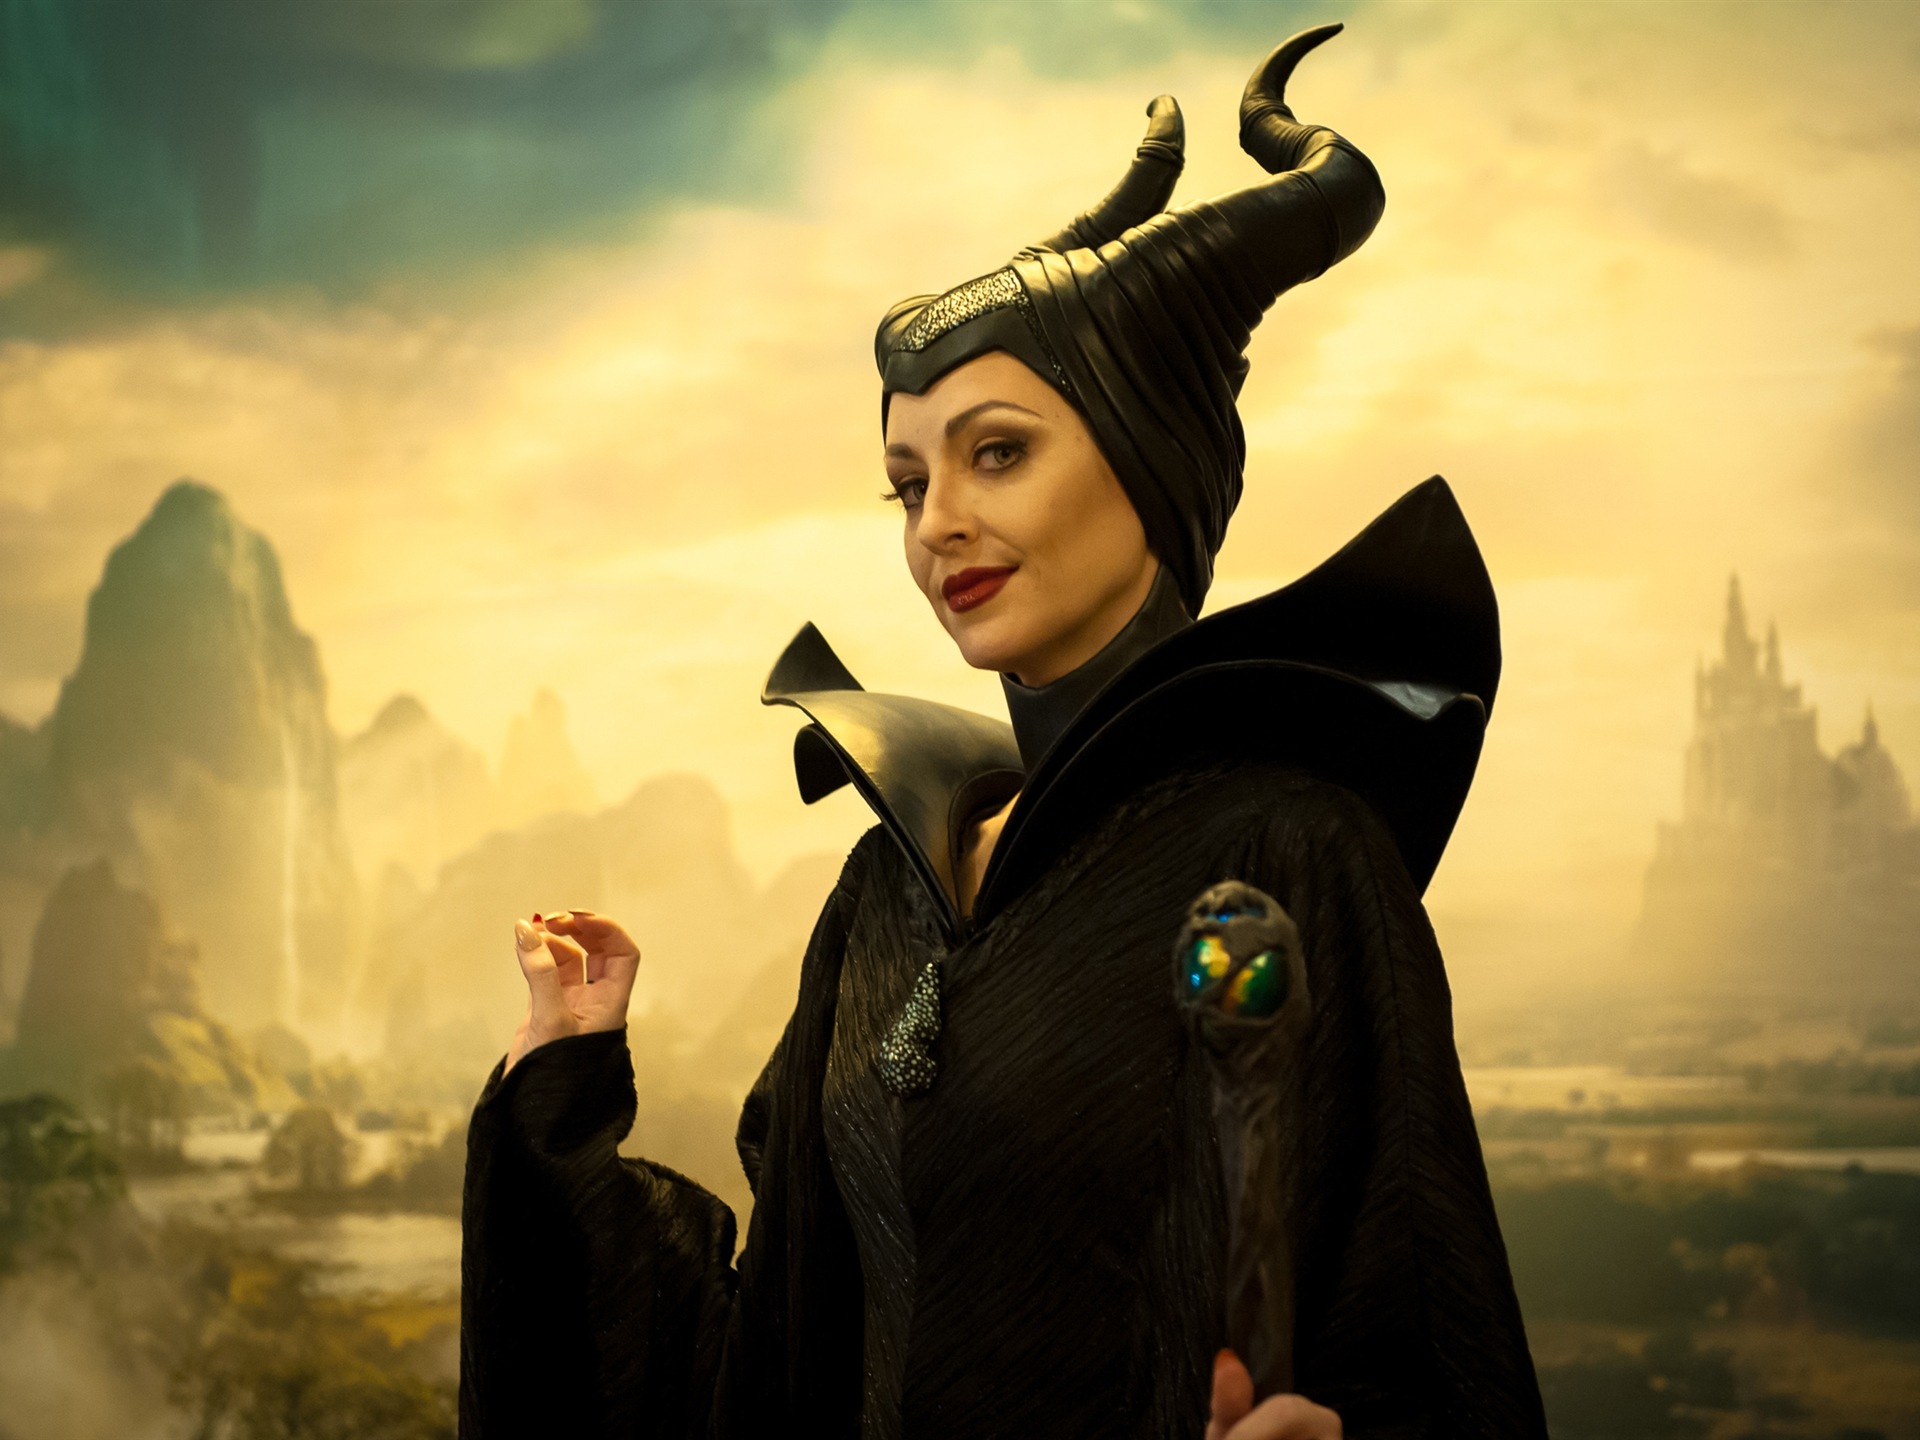 Maleficent 2014 HD movie wallpapers #11 - 1920x1440